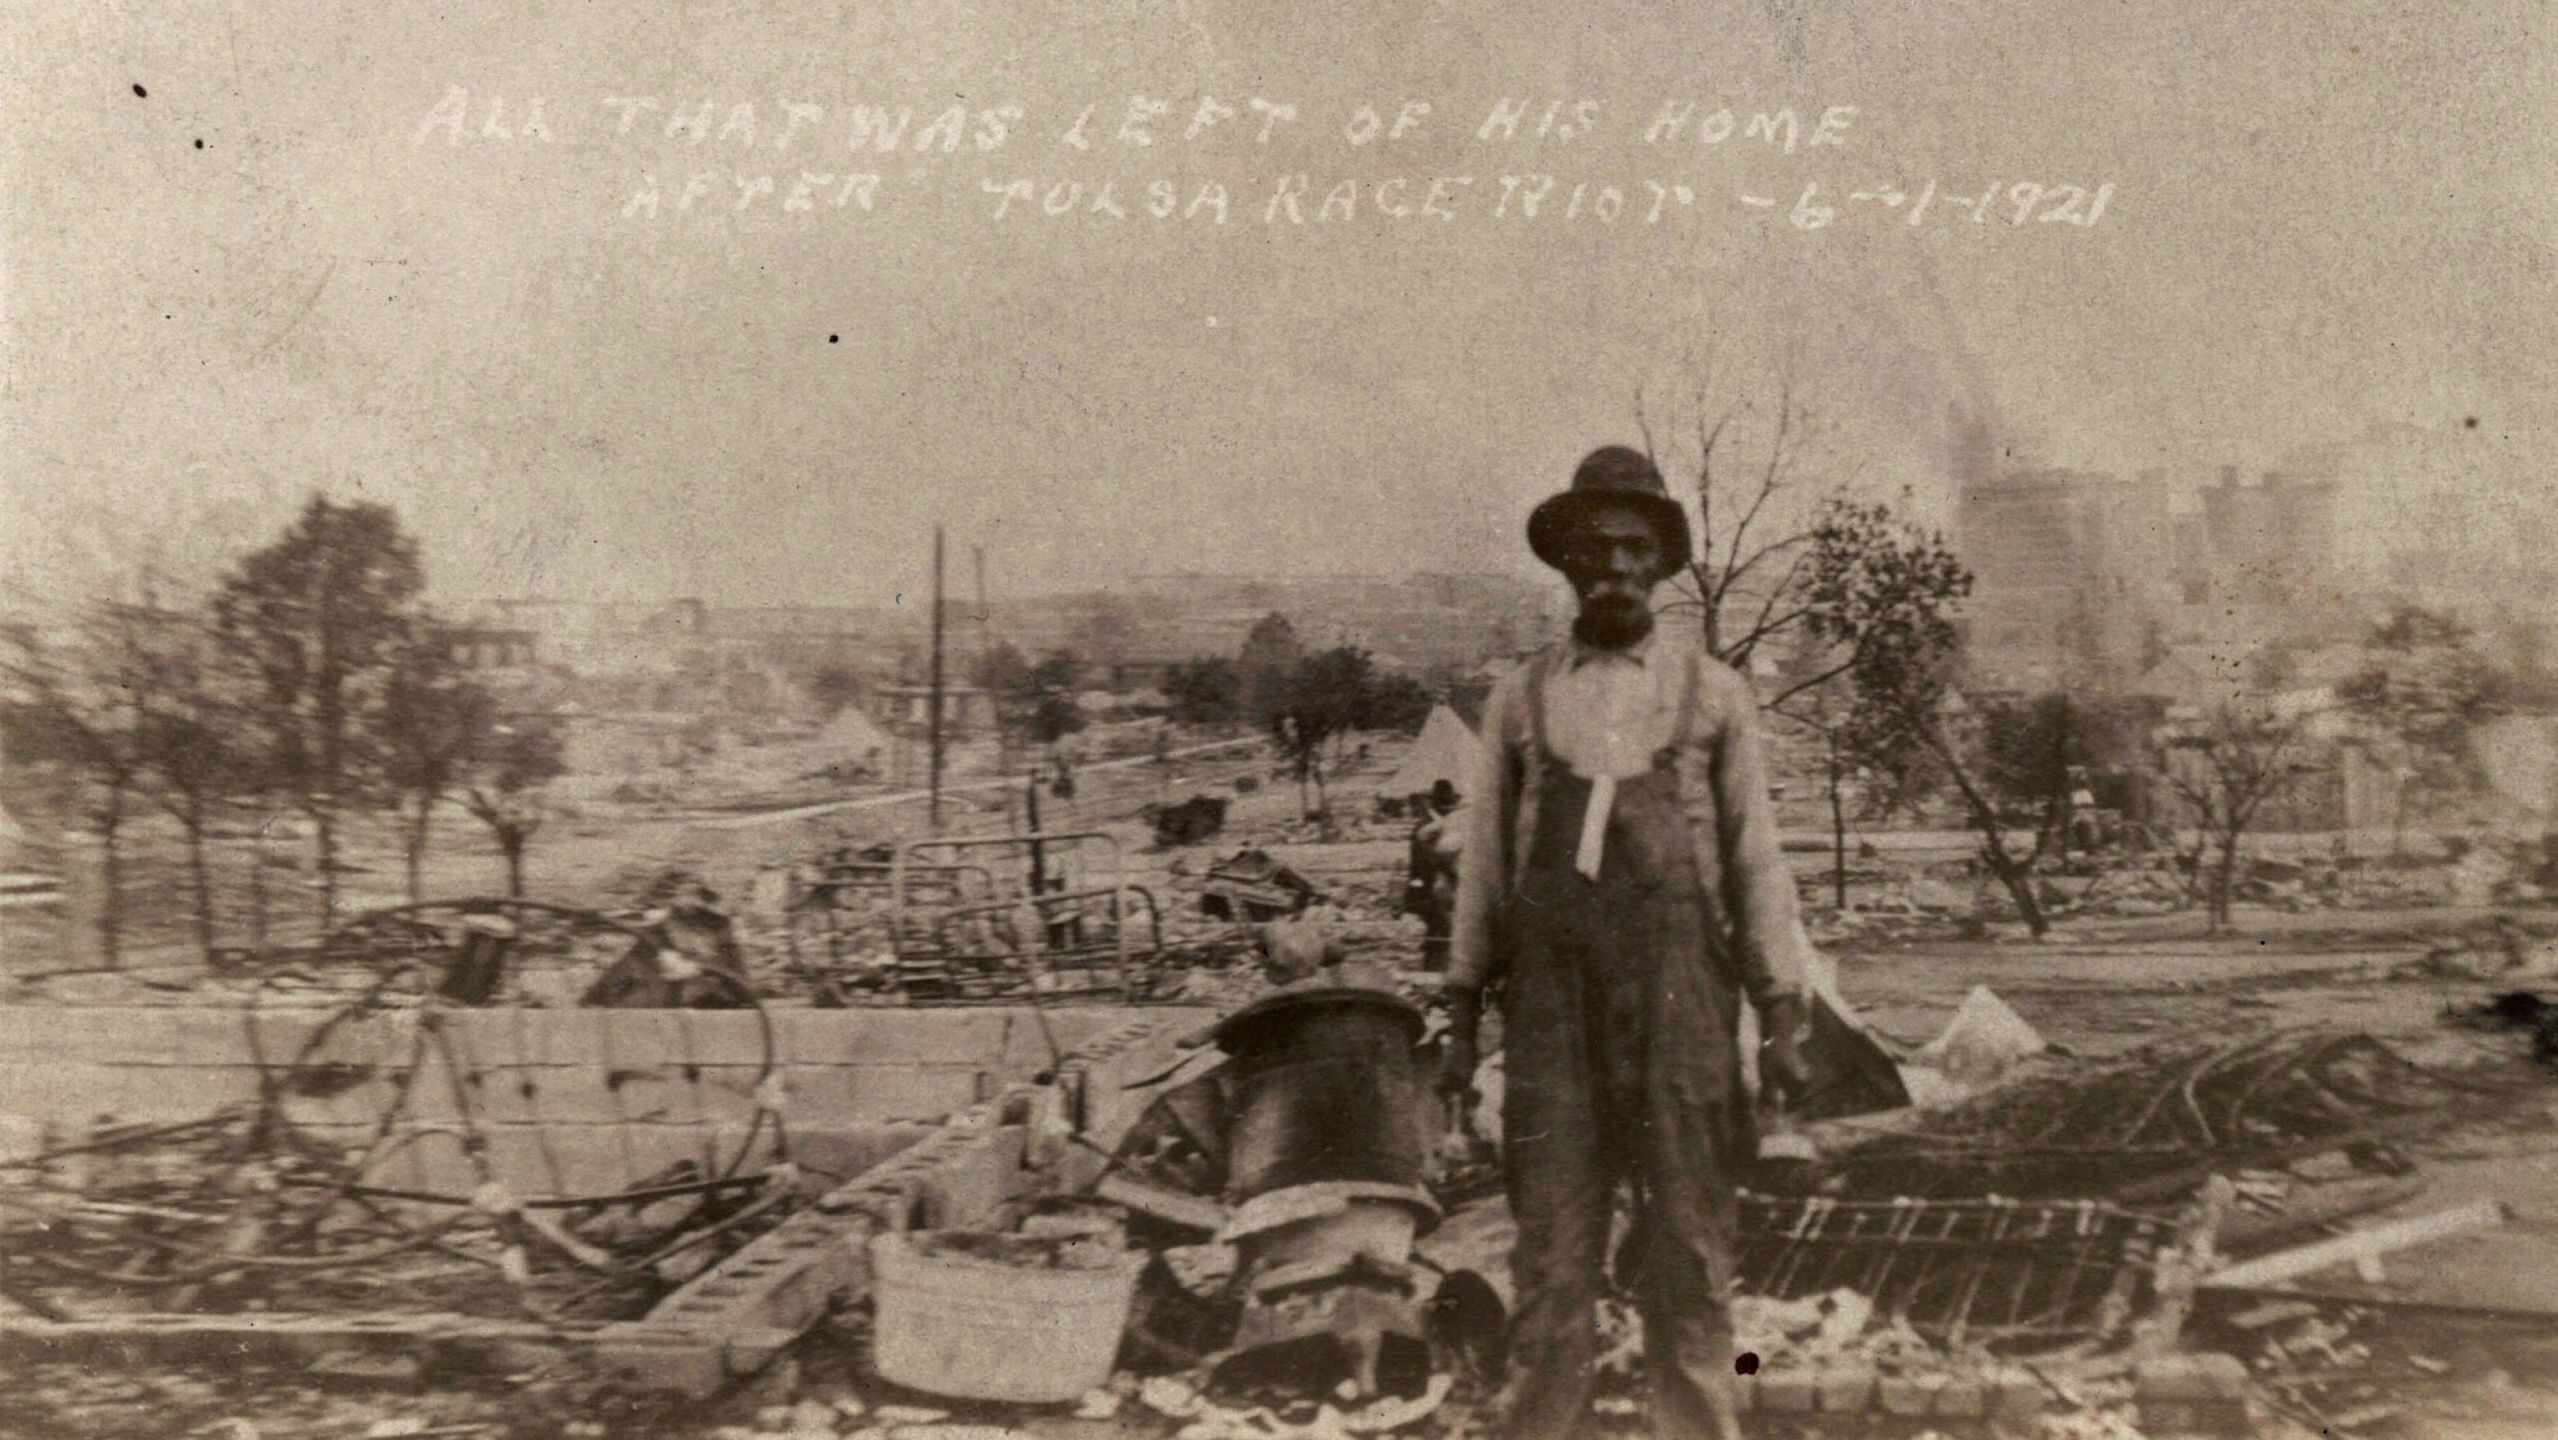 An unidentified man stands alone amid the ruins of what is described as his home in Tulsa, Okla., in the aftermath of the June, 1, 1921, Tulsa Race Massacre.